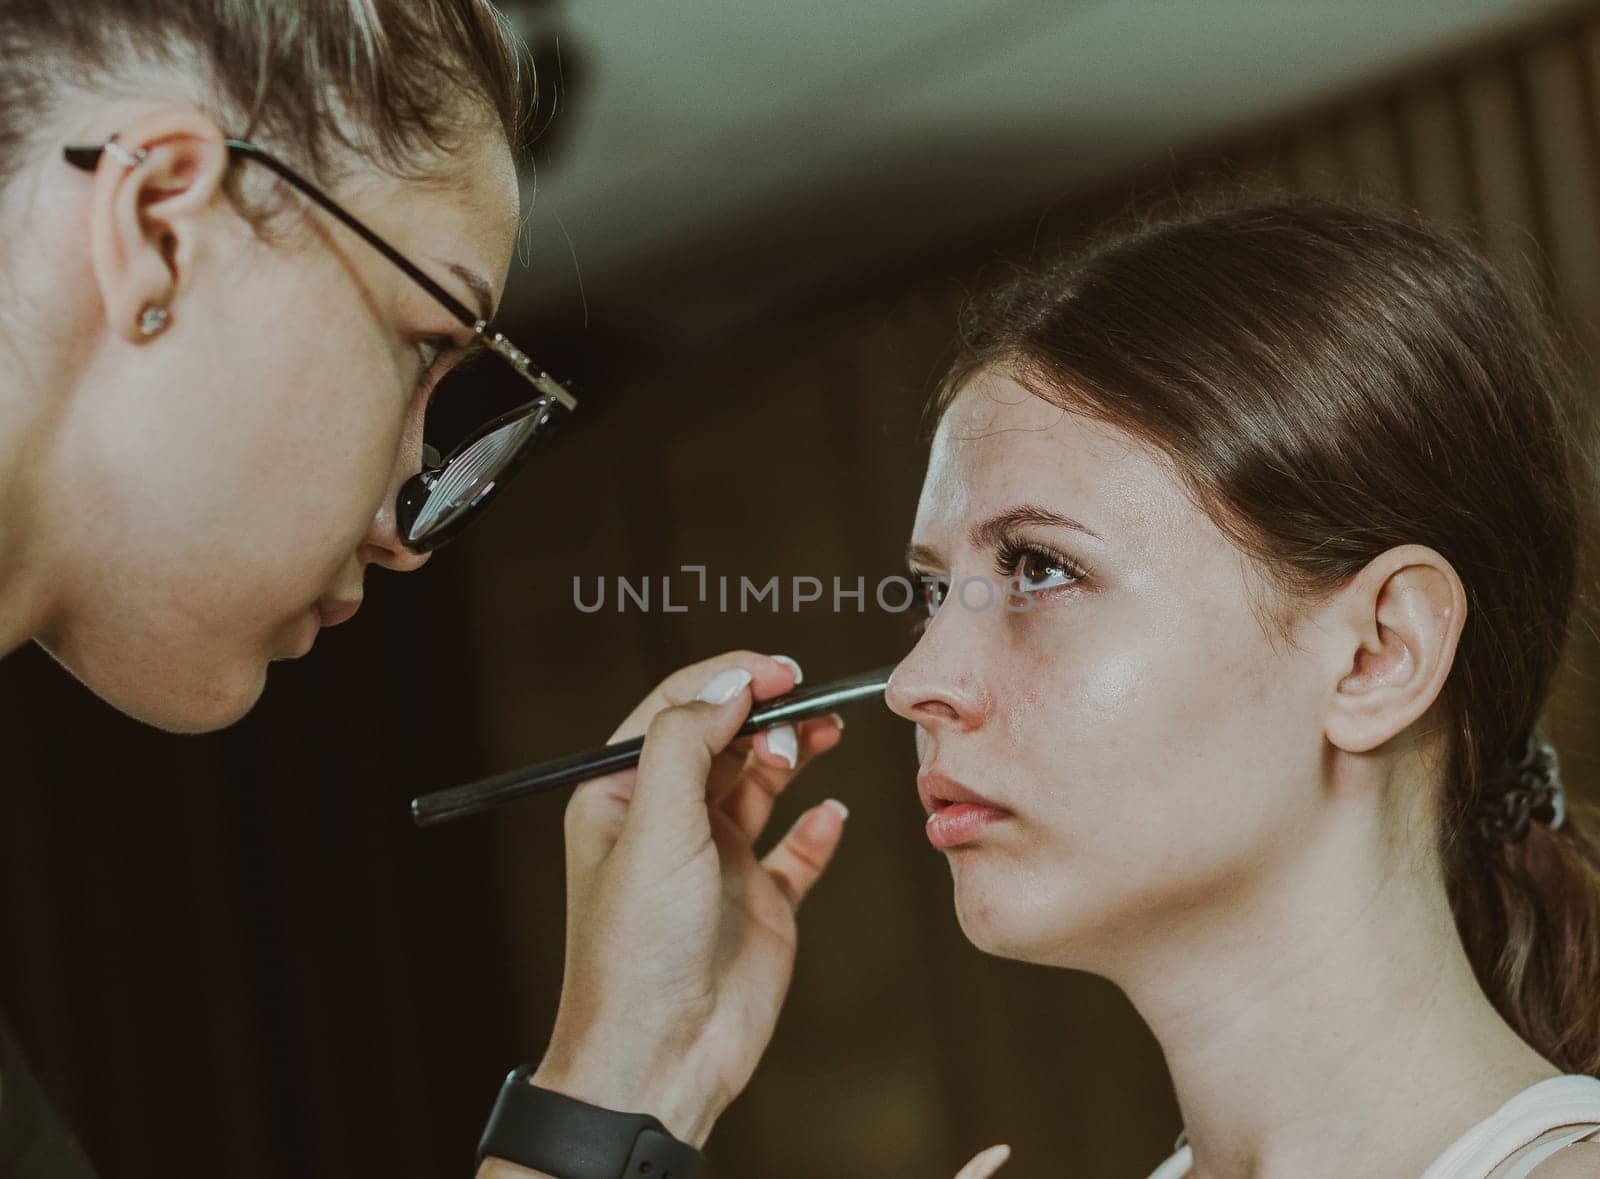 One young handsome Caucasian makeup artist applies eye shadow to the lower eyelid of a girl sitting in a chair early in the morning in a beauty salon, close-up side view. Step by step.